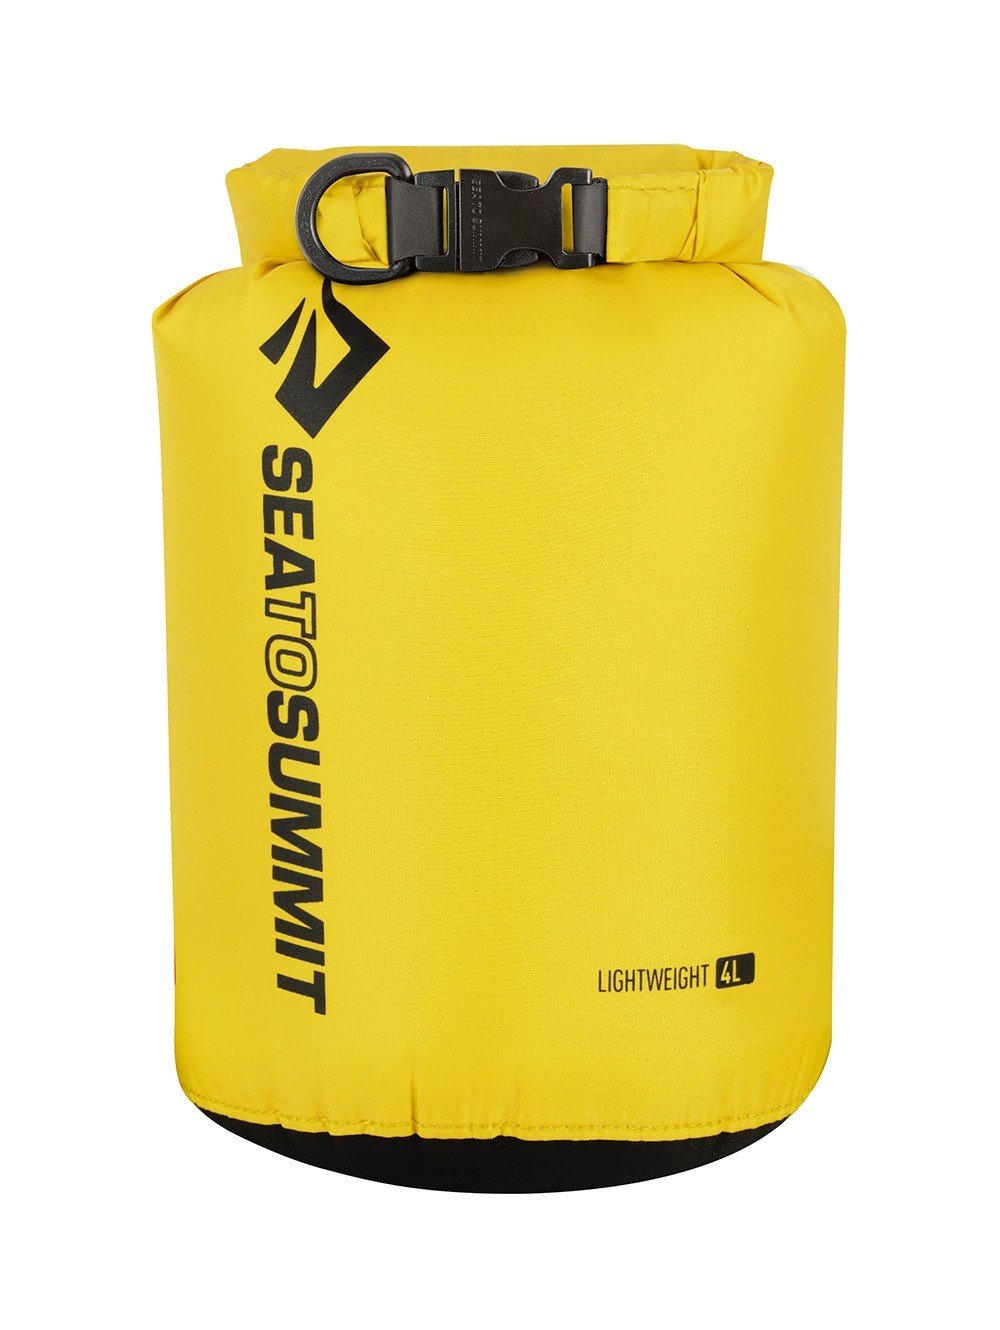 Sea To Summit Lightweight 70D 4 Litres Dry Sack Bags, Packs and Cases Sea To Summit Yellow Tactical Gear Supplier Tactical Distributors Australia